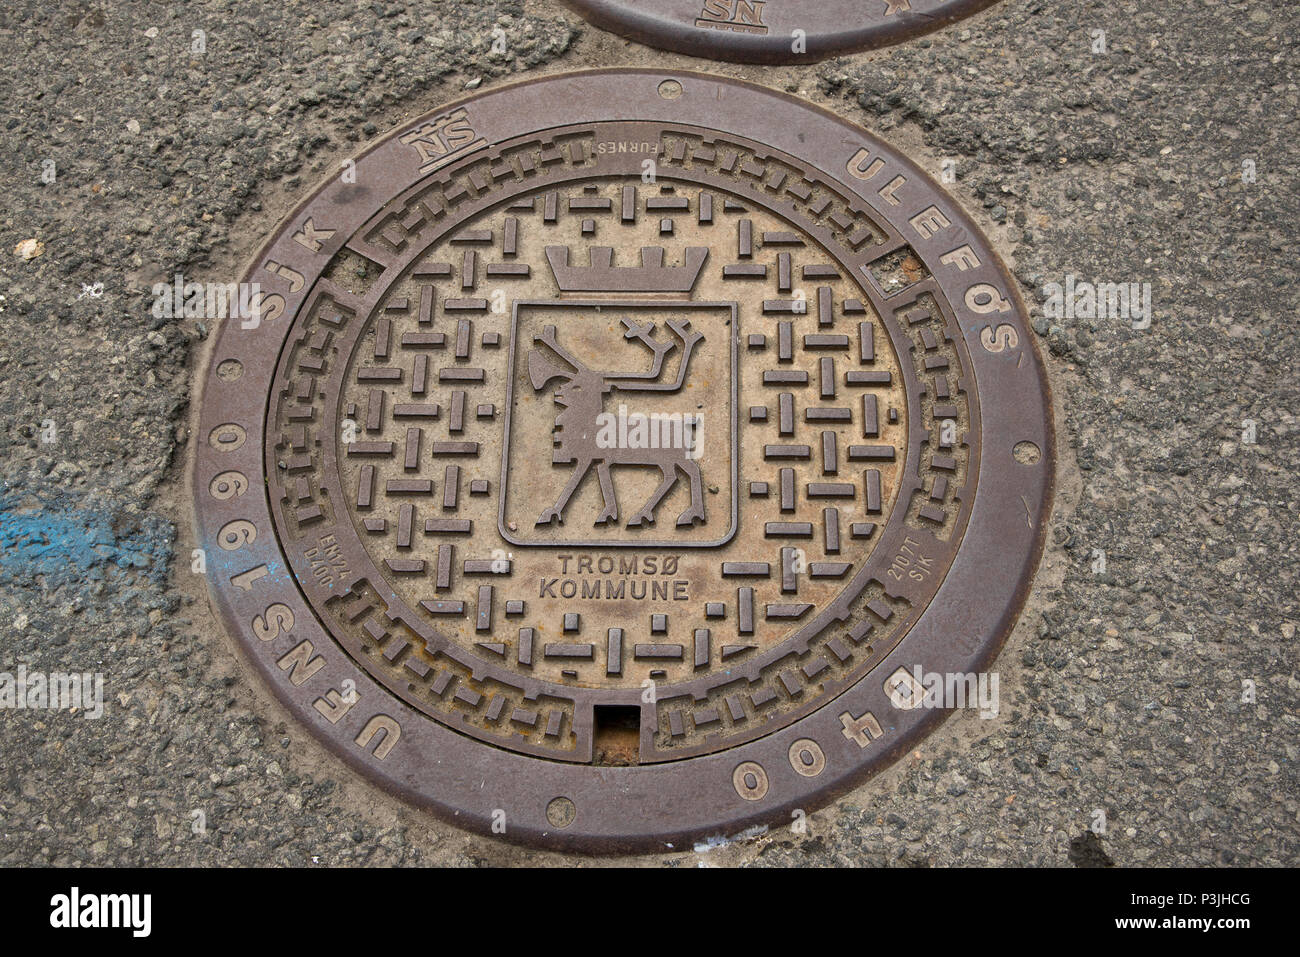 A reindeer is the coat of arms of Tromsø and therefore of the largest urban area in Northern Norway.It is shown also on manhole covers. Stock Photo